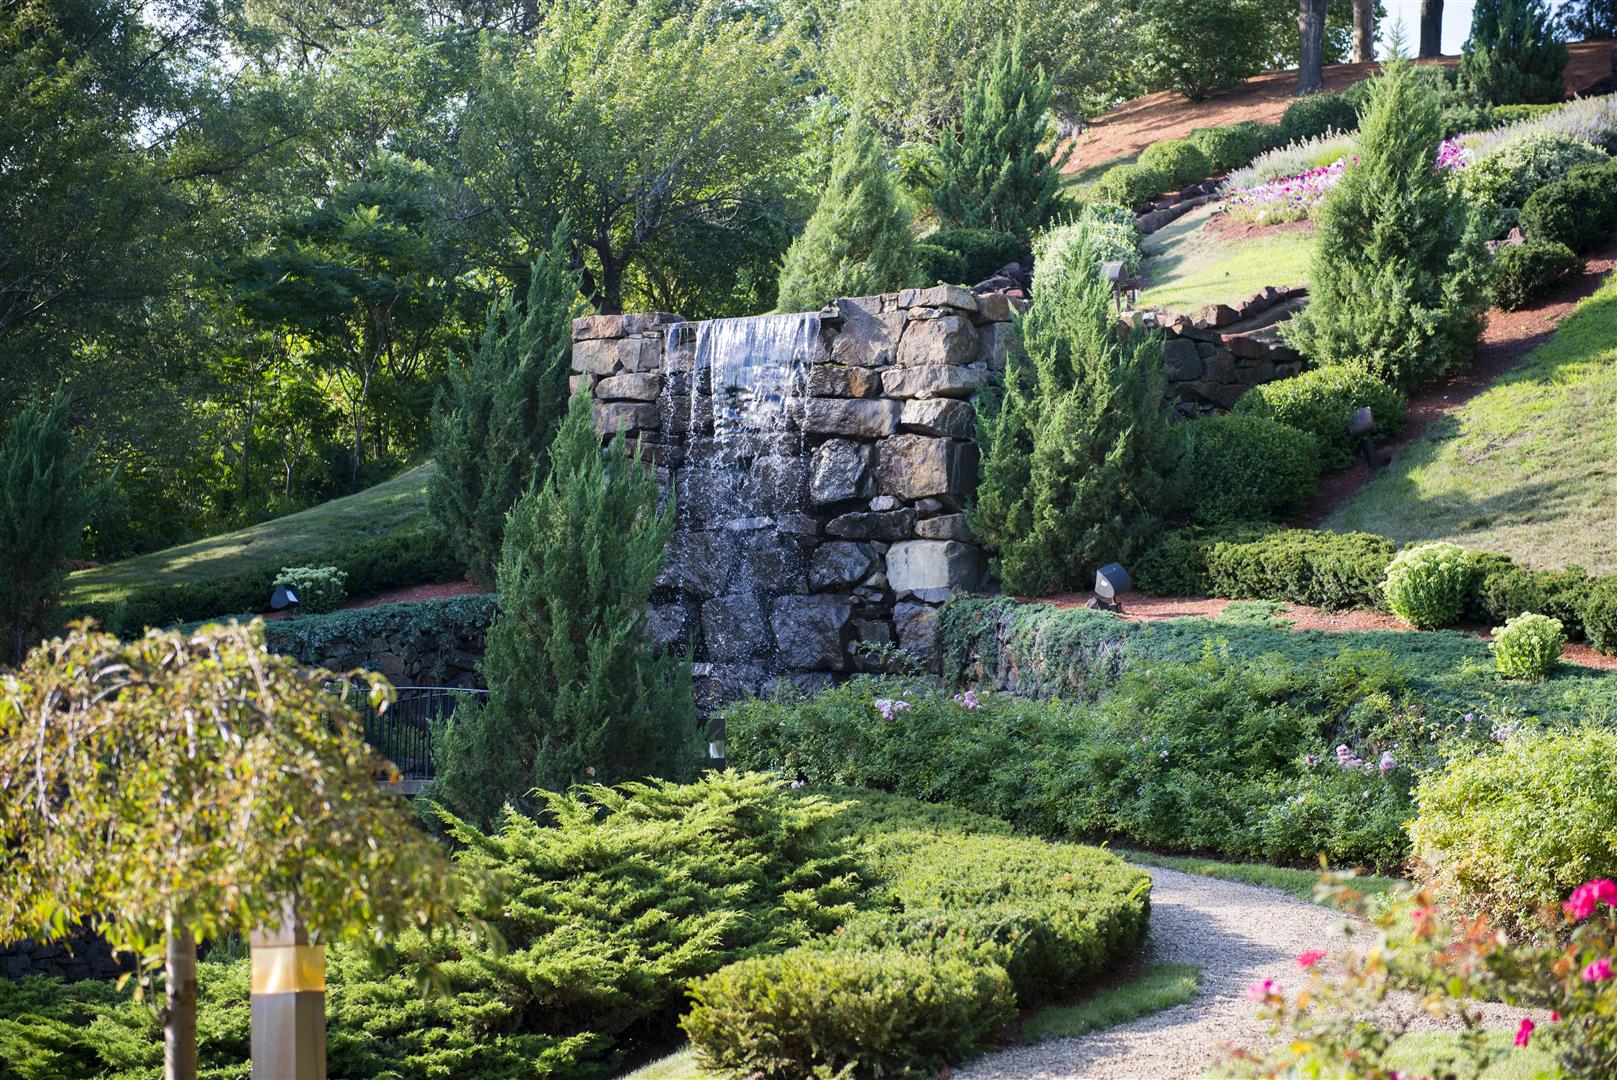 Garden and waterfall outside of Braintree location